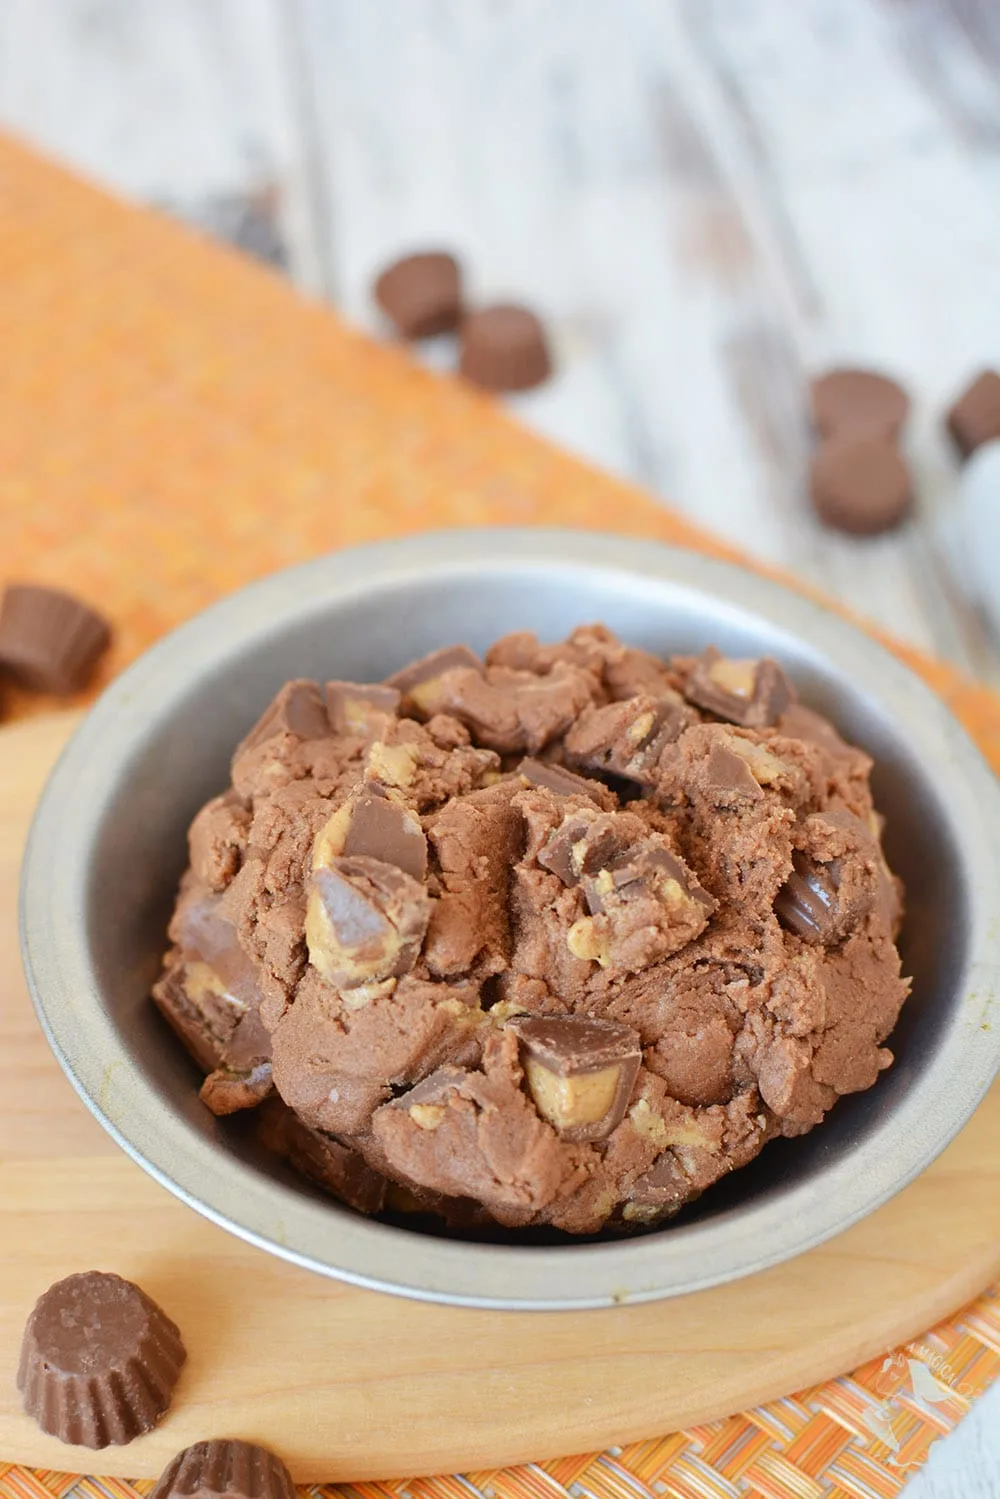 Chocolate Peanut Butter Cookie Dough in a bowl